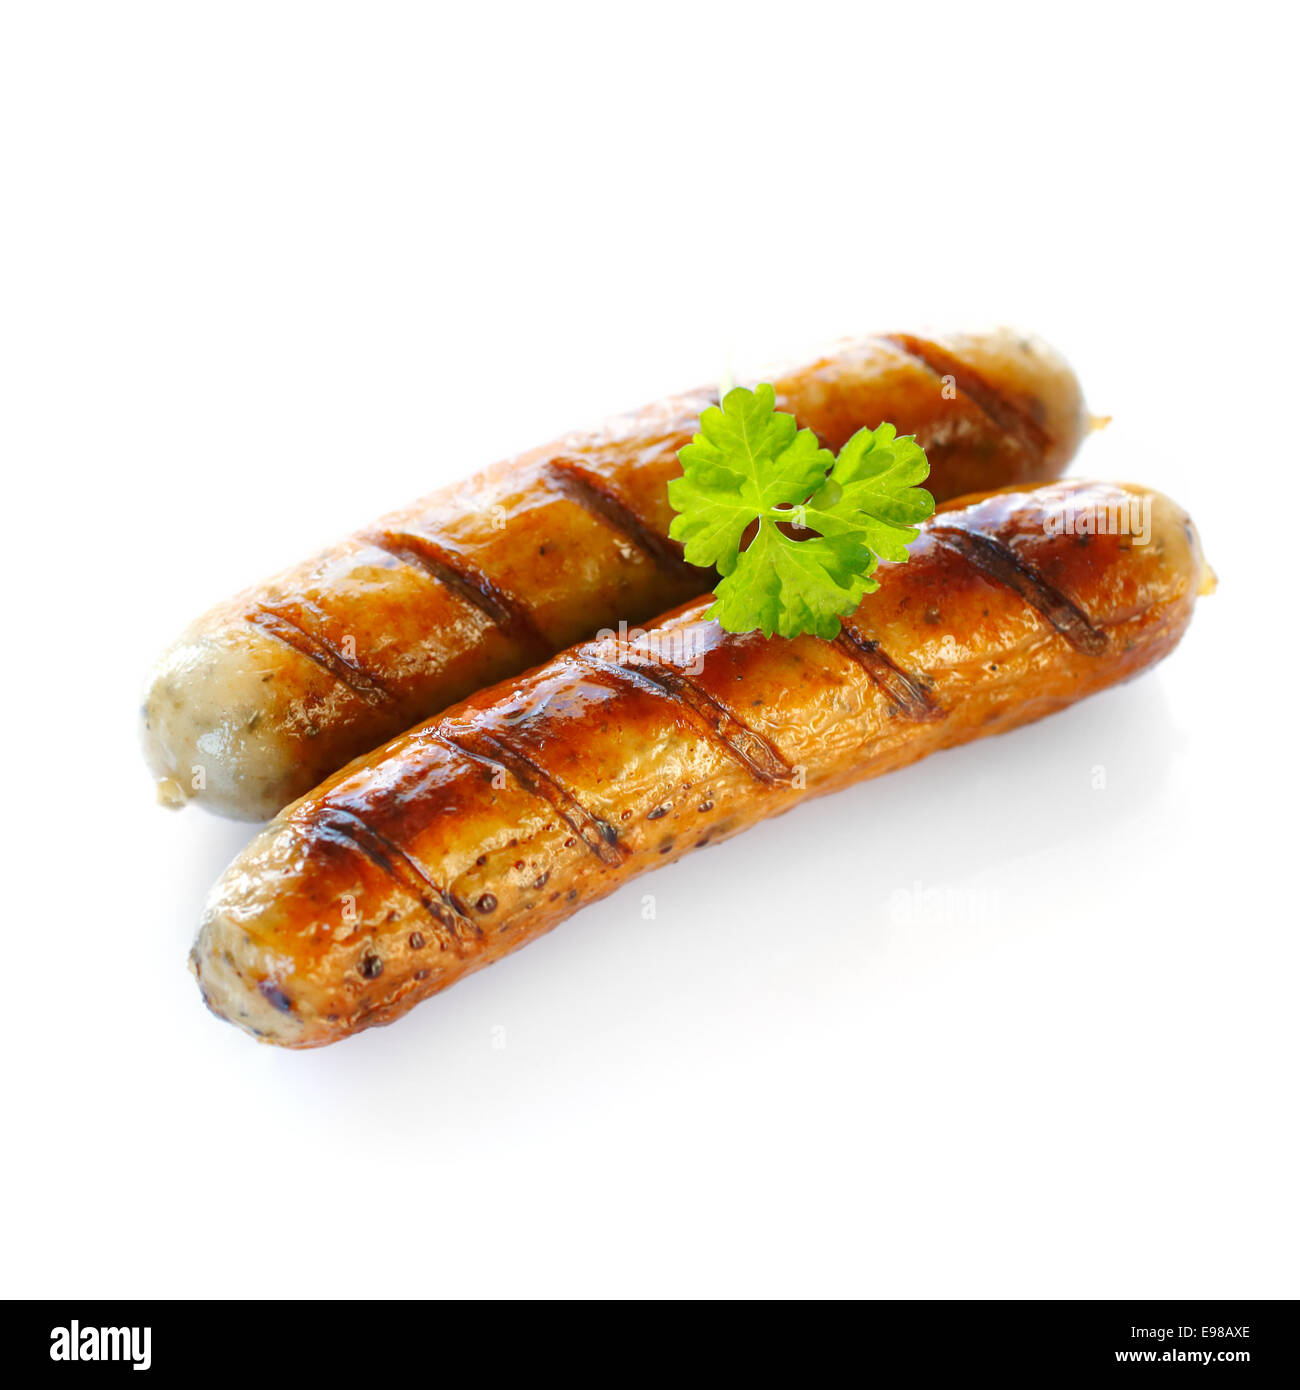 Close up of two cooked sausages, focus on the one at the front with a sprig of parsley on top against white background. Stock Photo